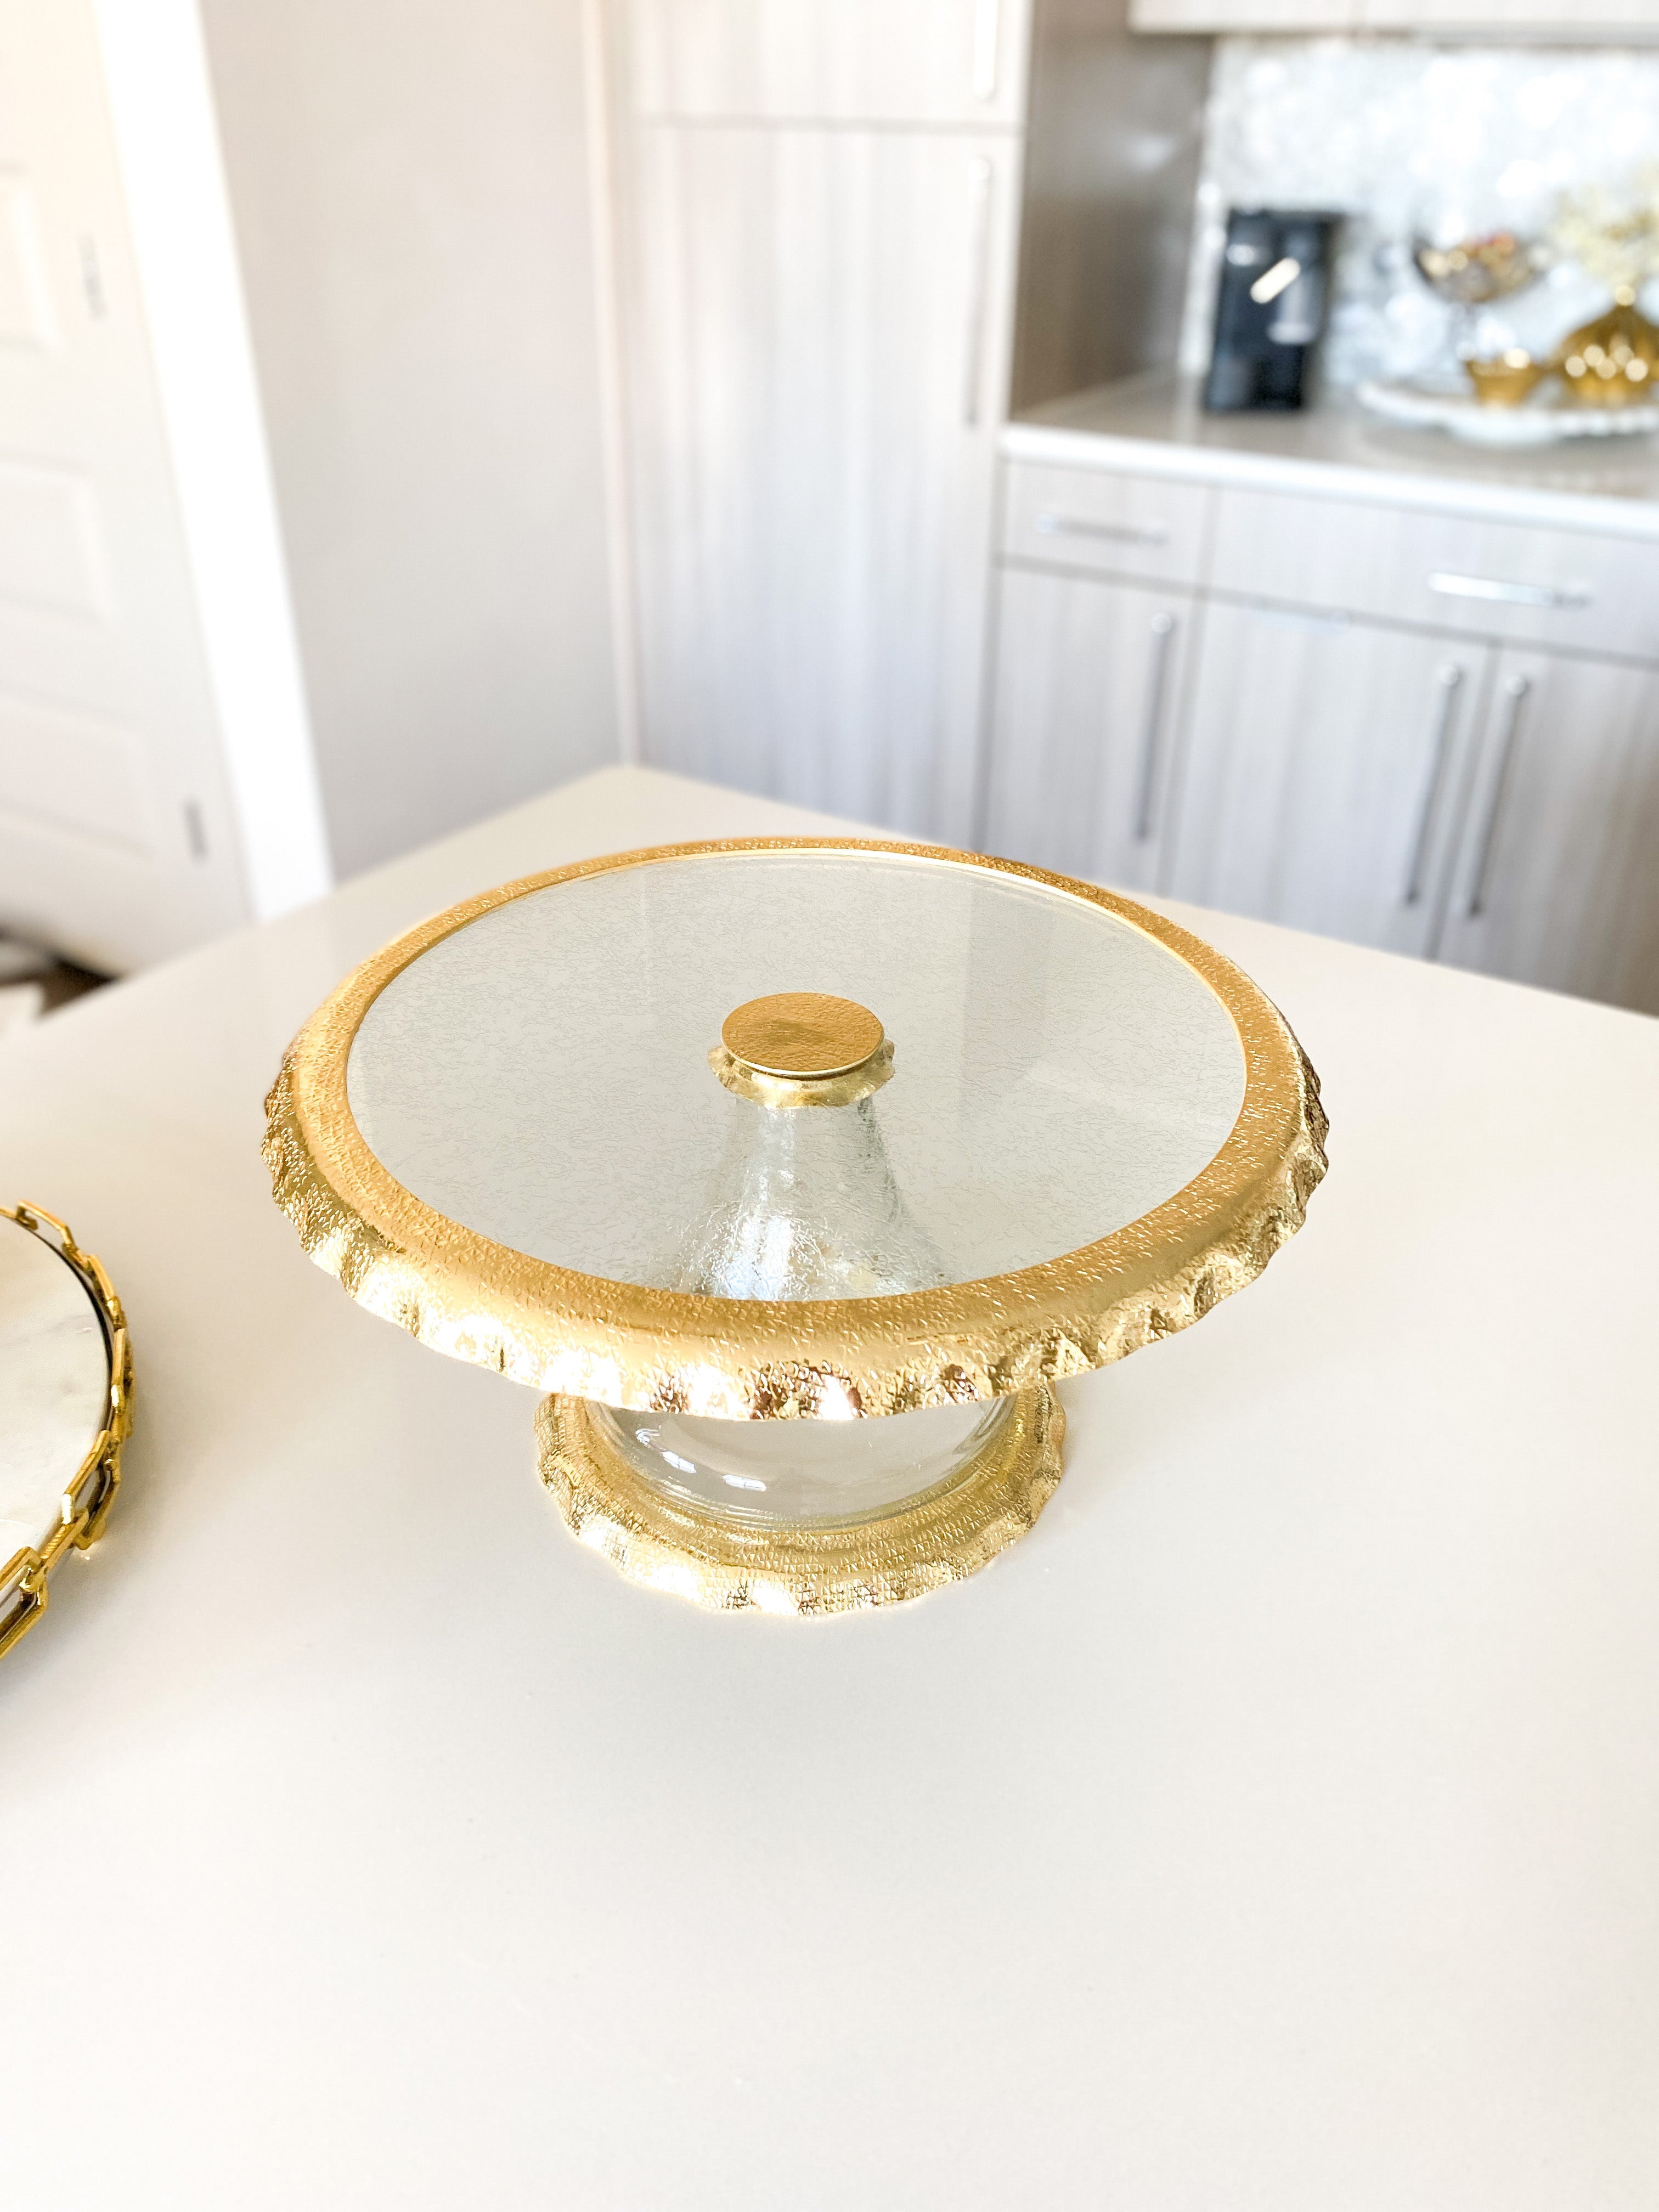 Glass Cake Stand with Gold Ruffled Details - HTS HOME DECOR